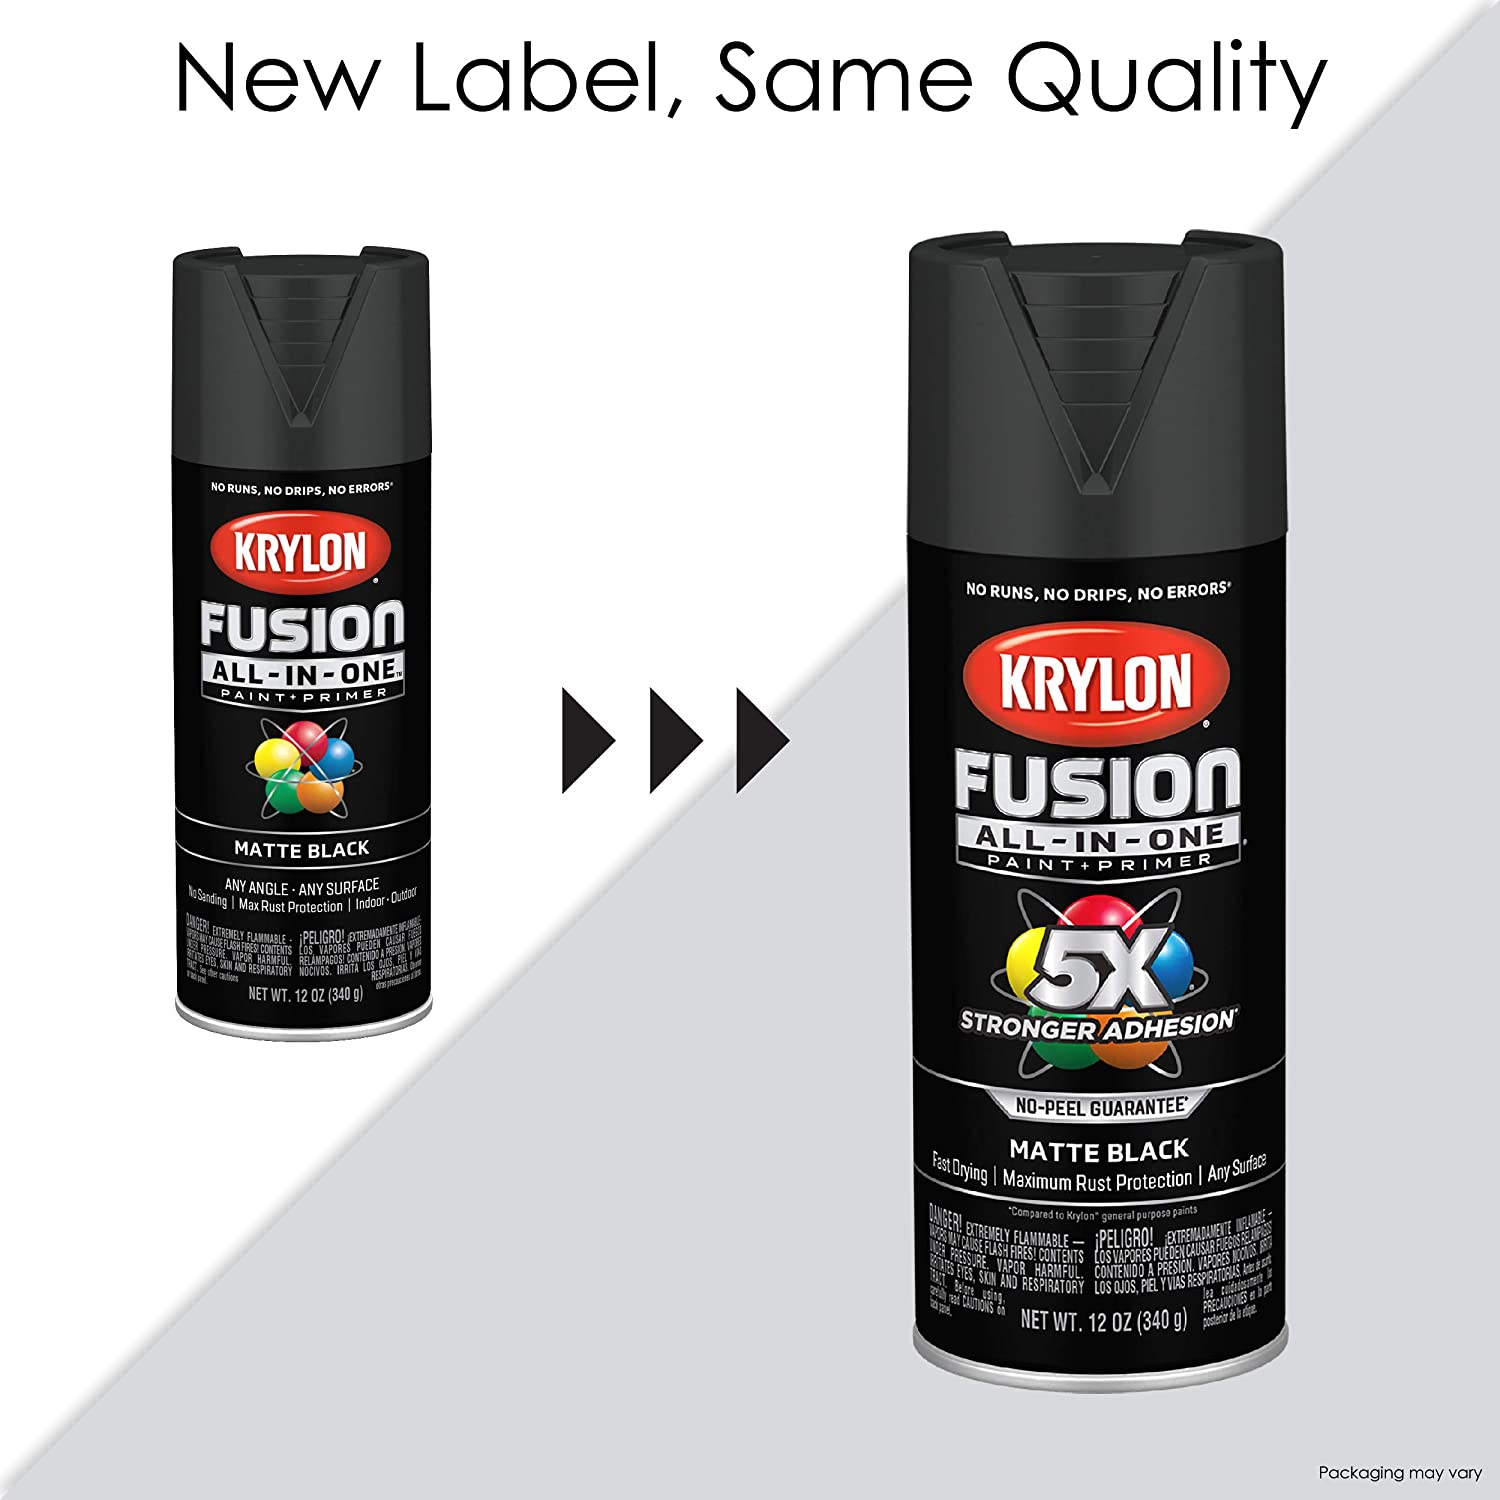 Krylon Fusion All-In-One Spray Paint close up